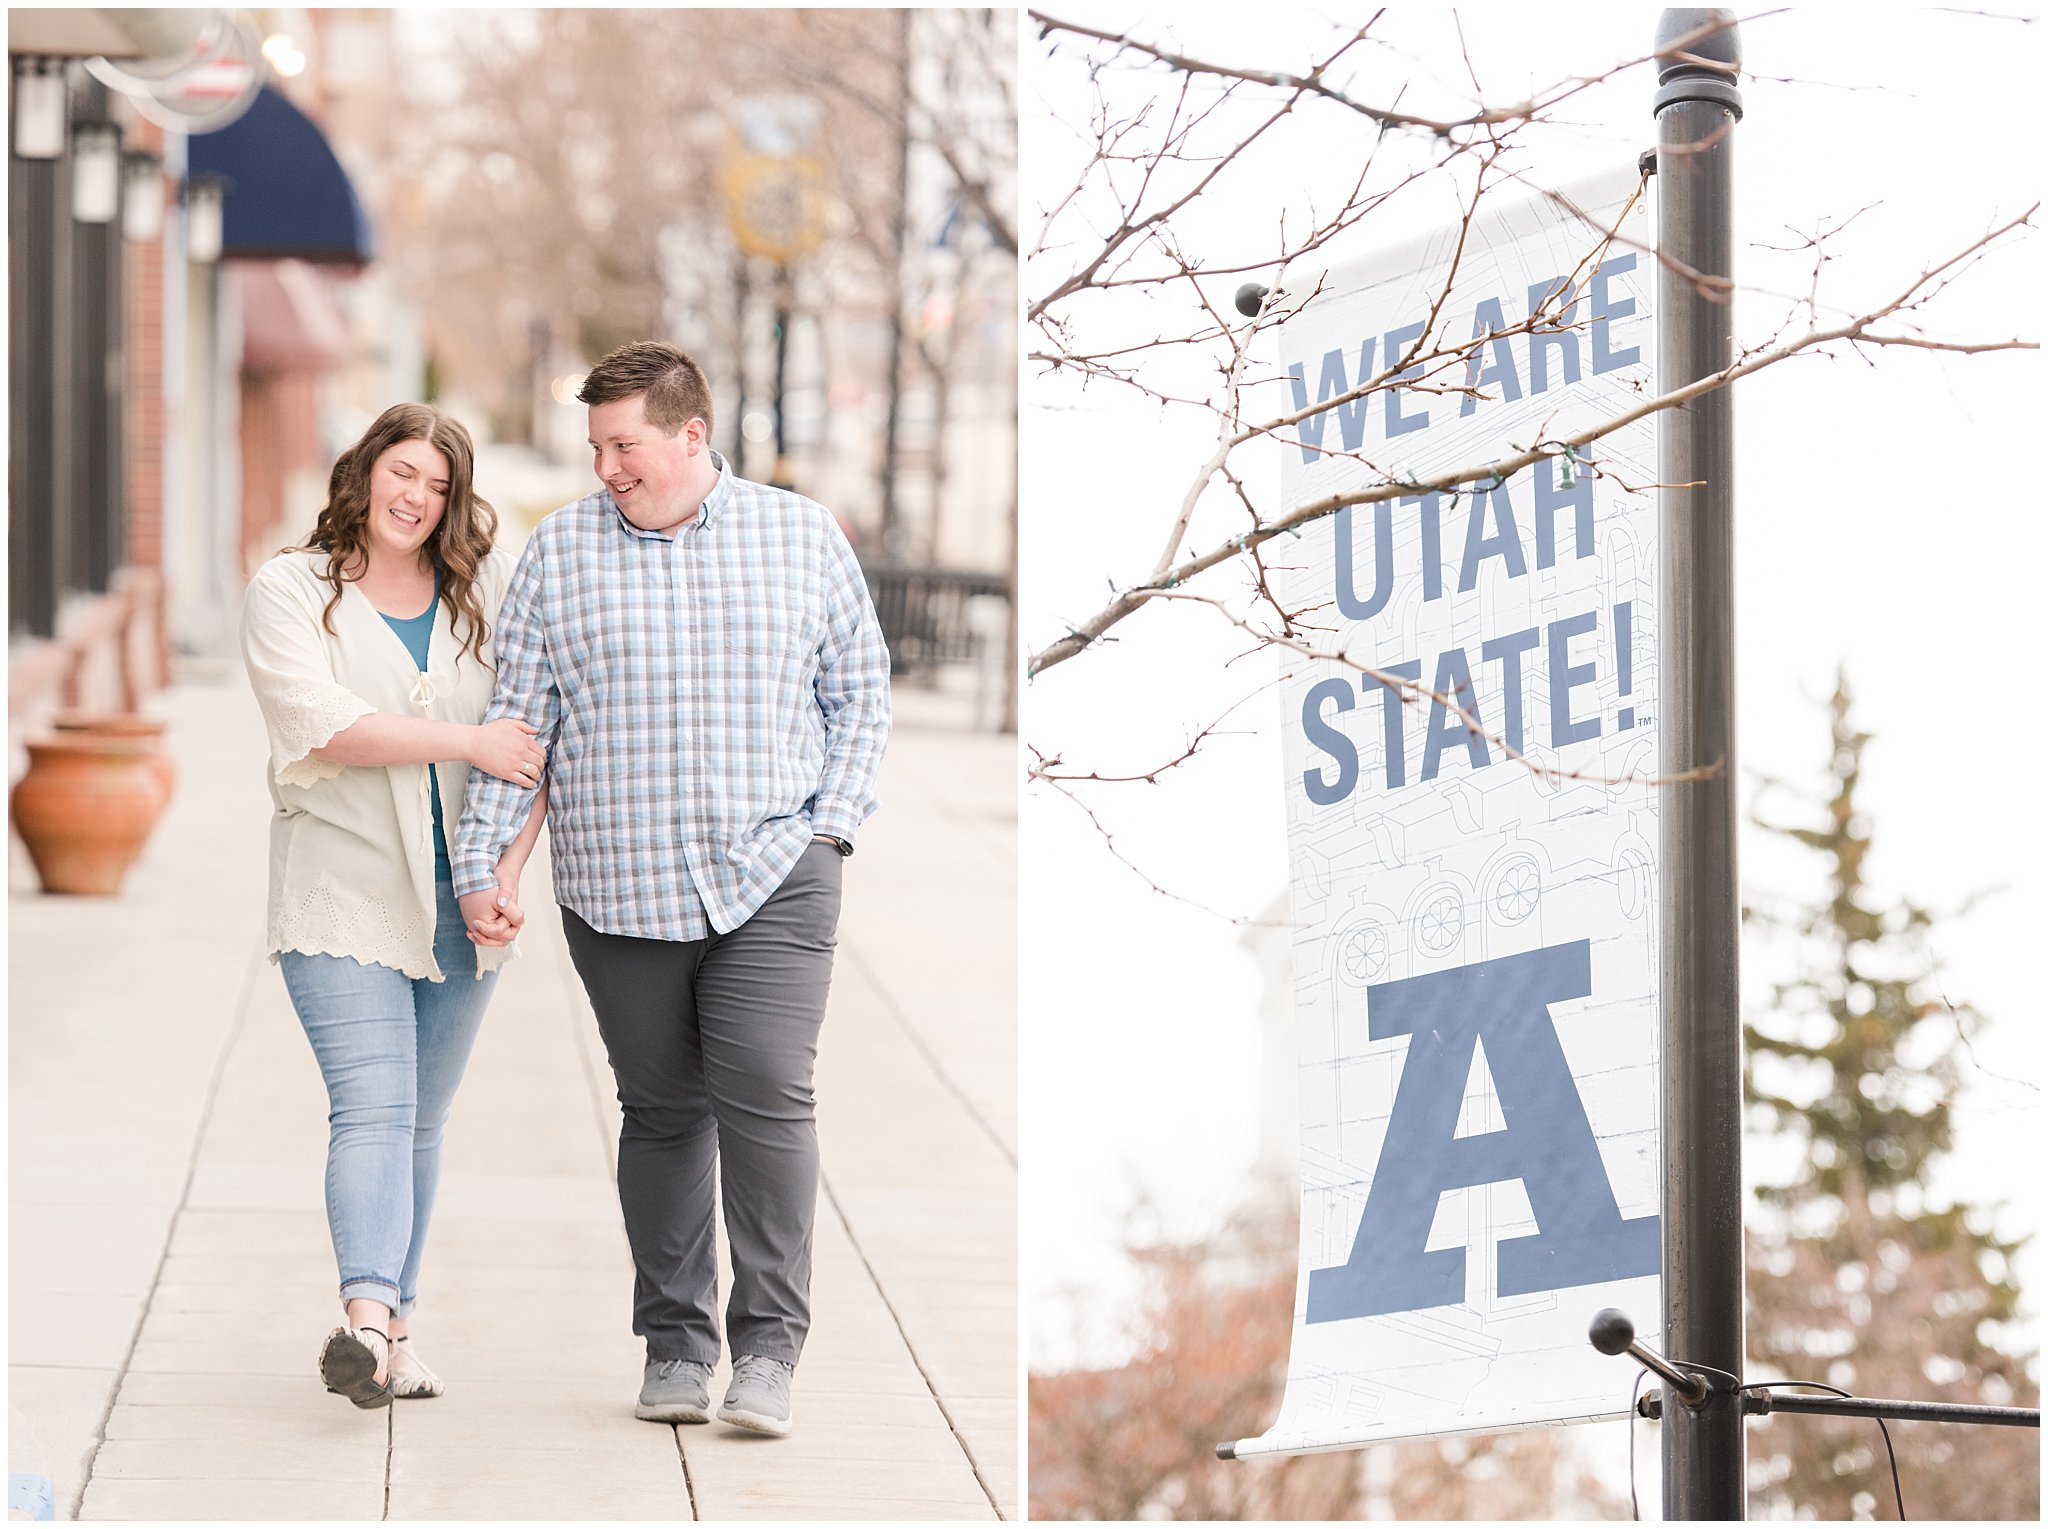 Couple walking dressed in light blue and white urban engagements | Downtown Logan and Green Canyon Engagements | Utah Wedding Photographers | Jessie and Dallin Photography